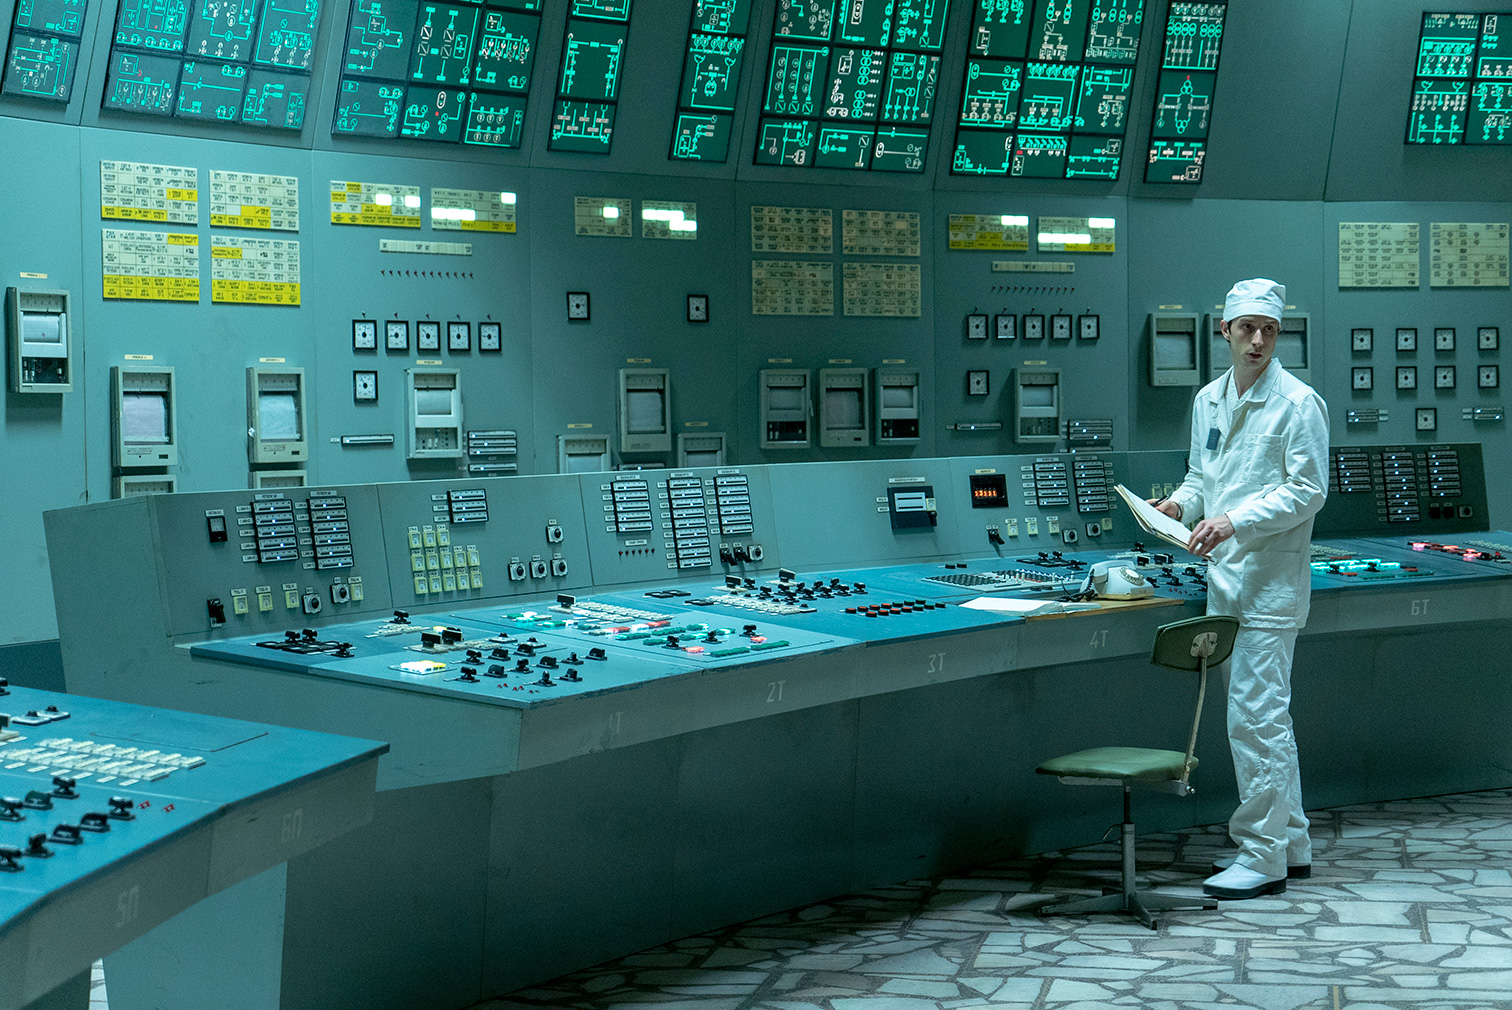 The control room from Chernobyl was recreated using historic photographs